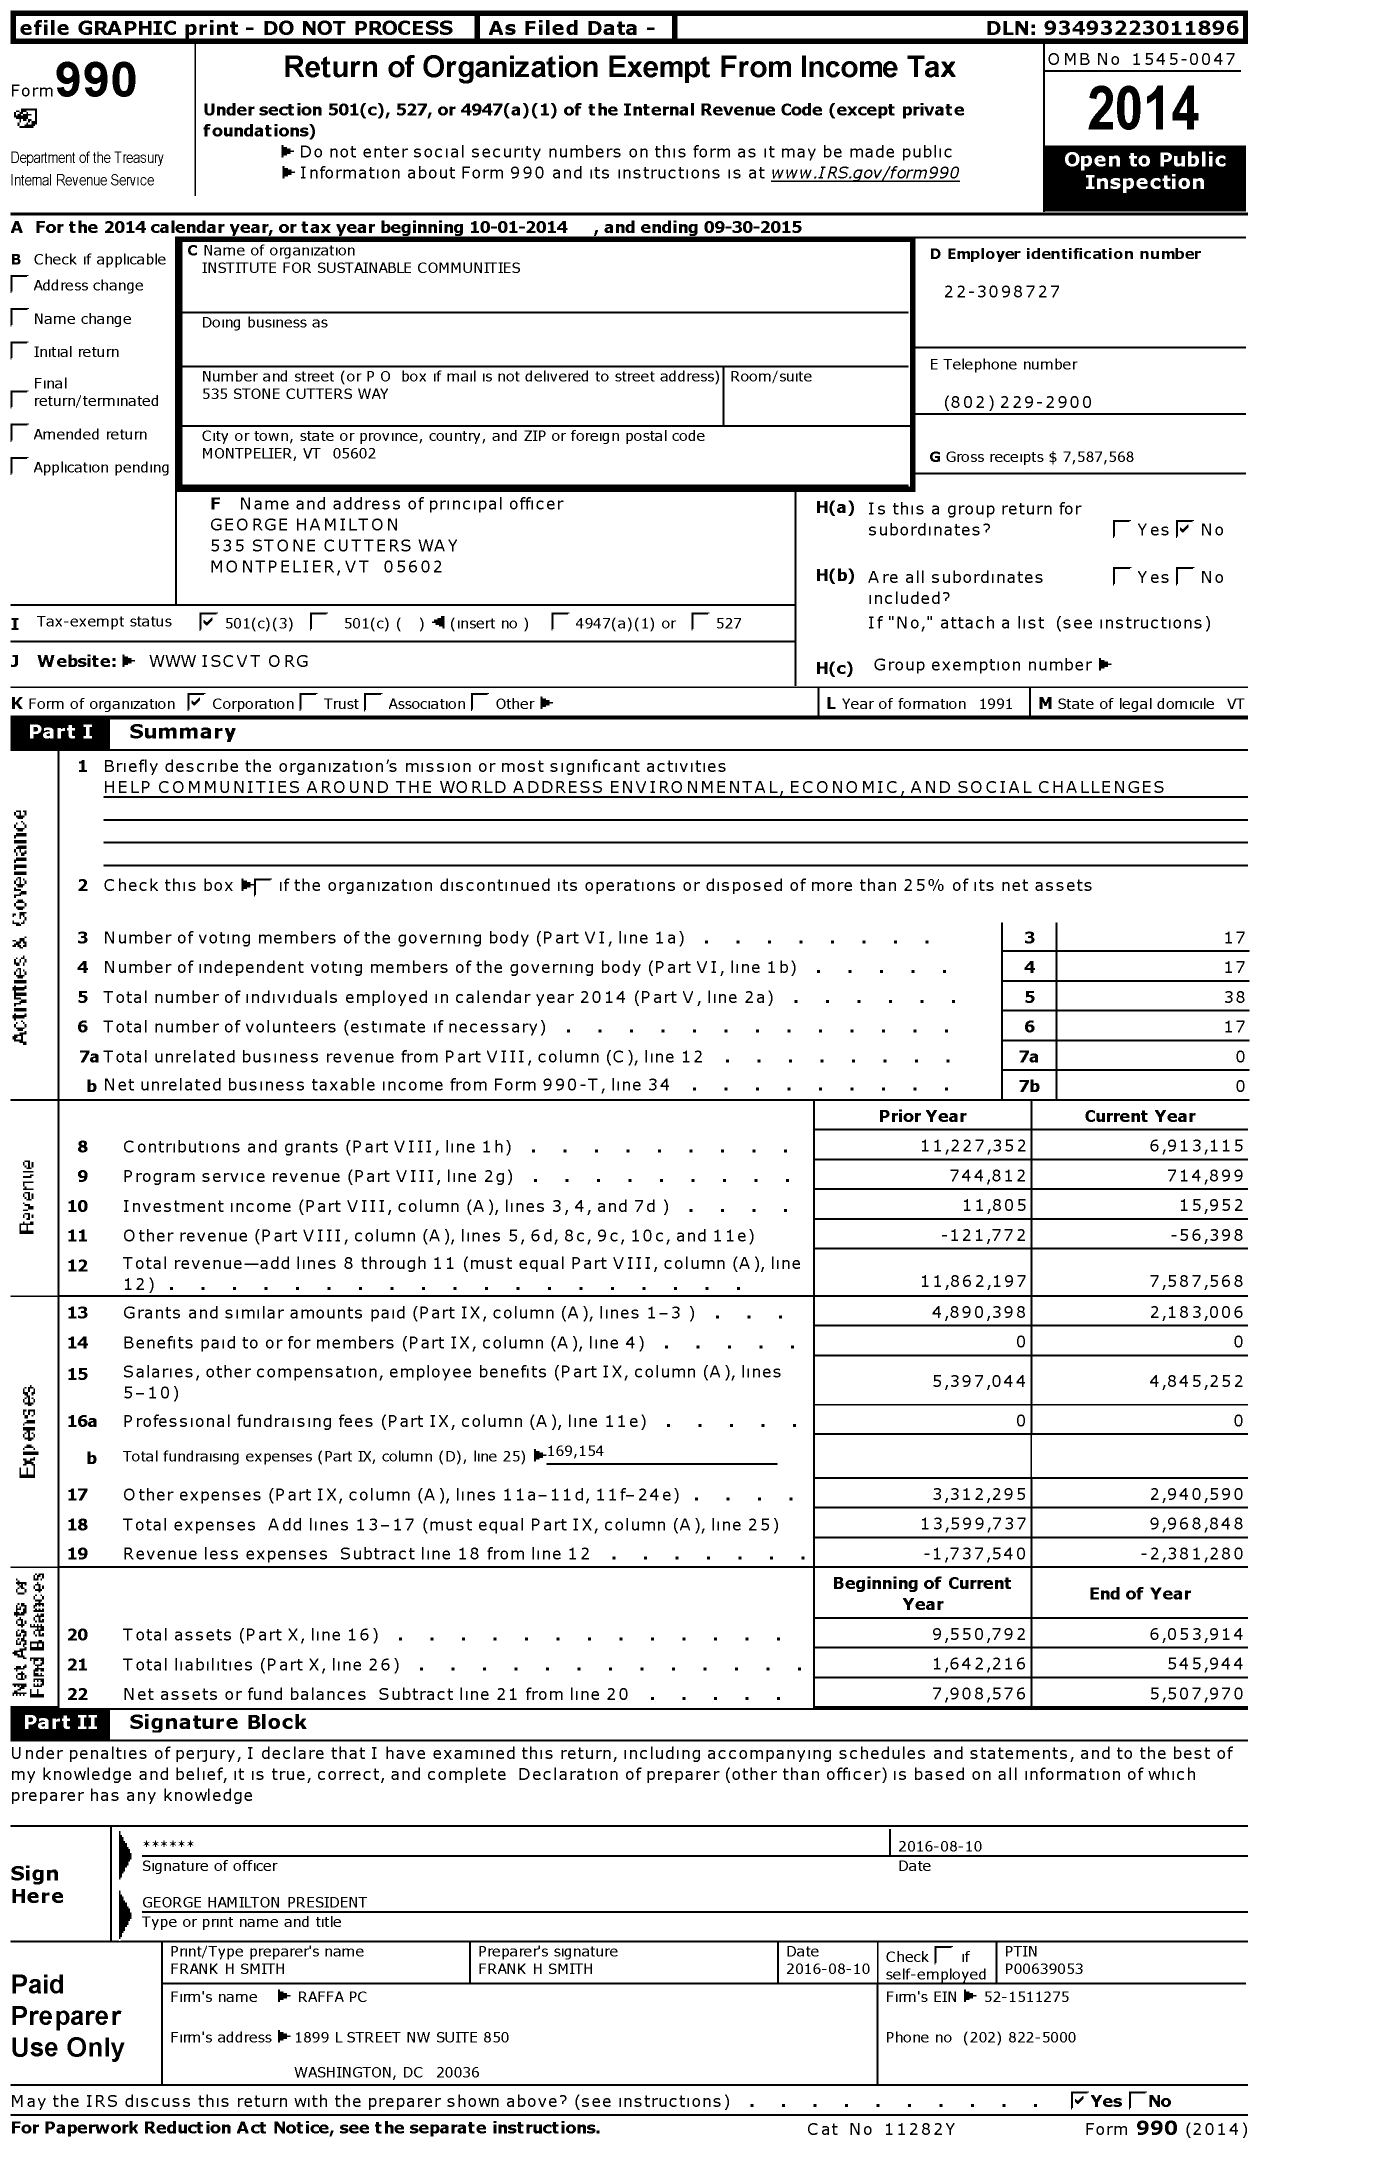 Image of first page of 2014 Form 990 for Institute for Sustainable Communities (ISC)